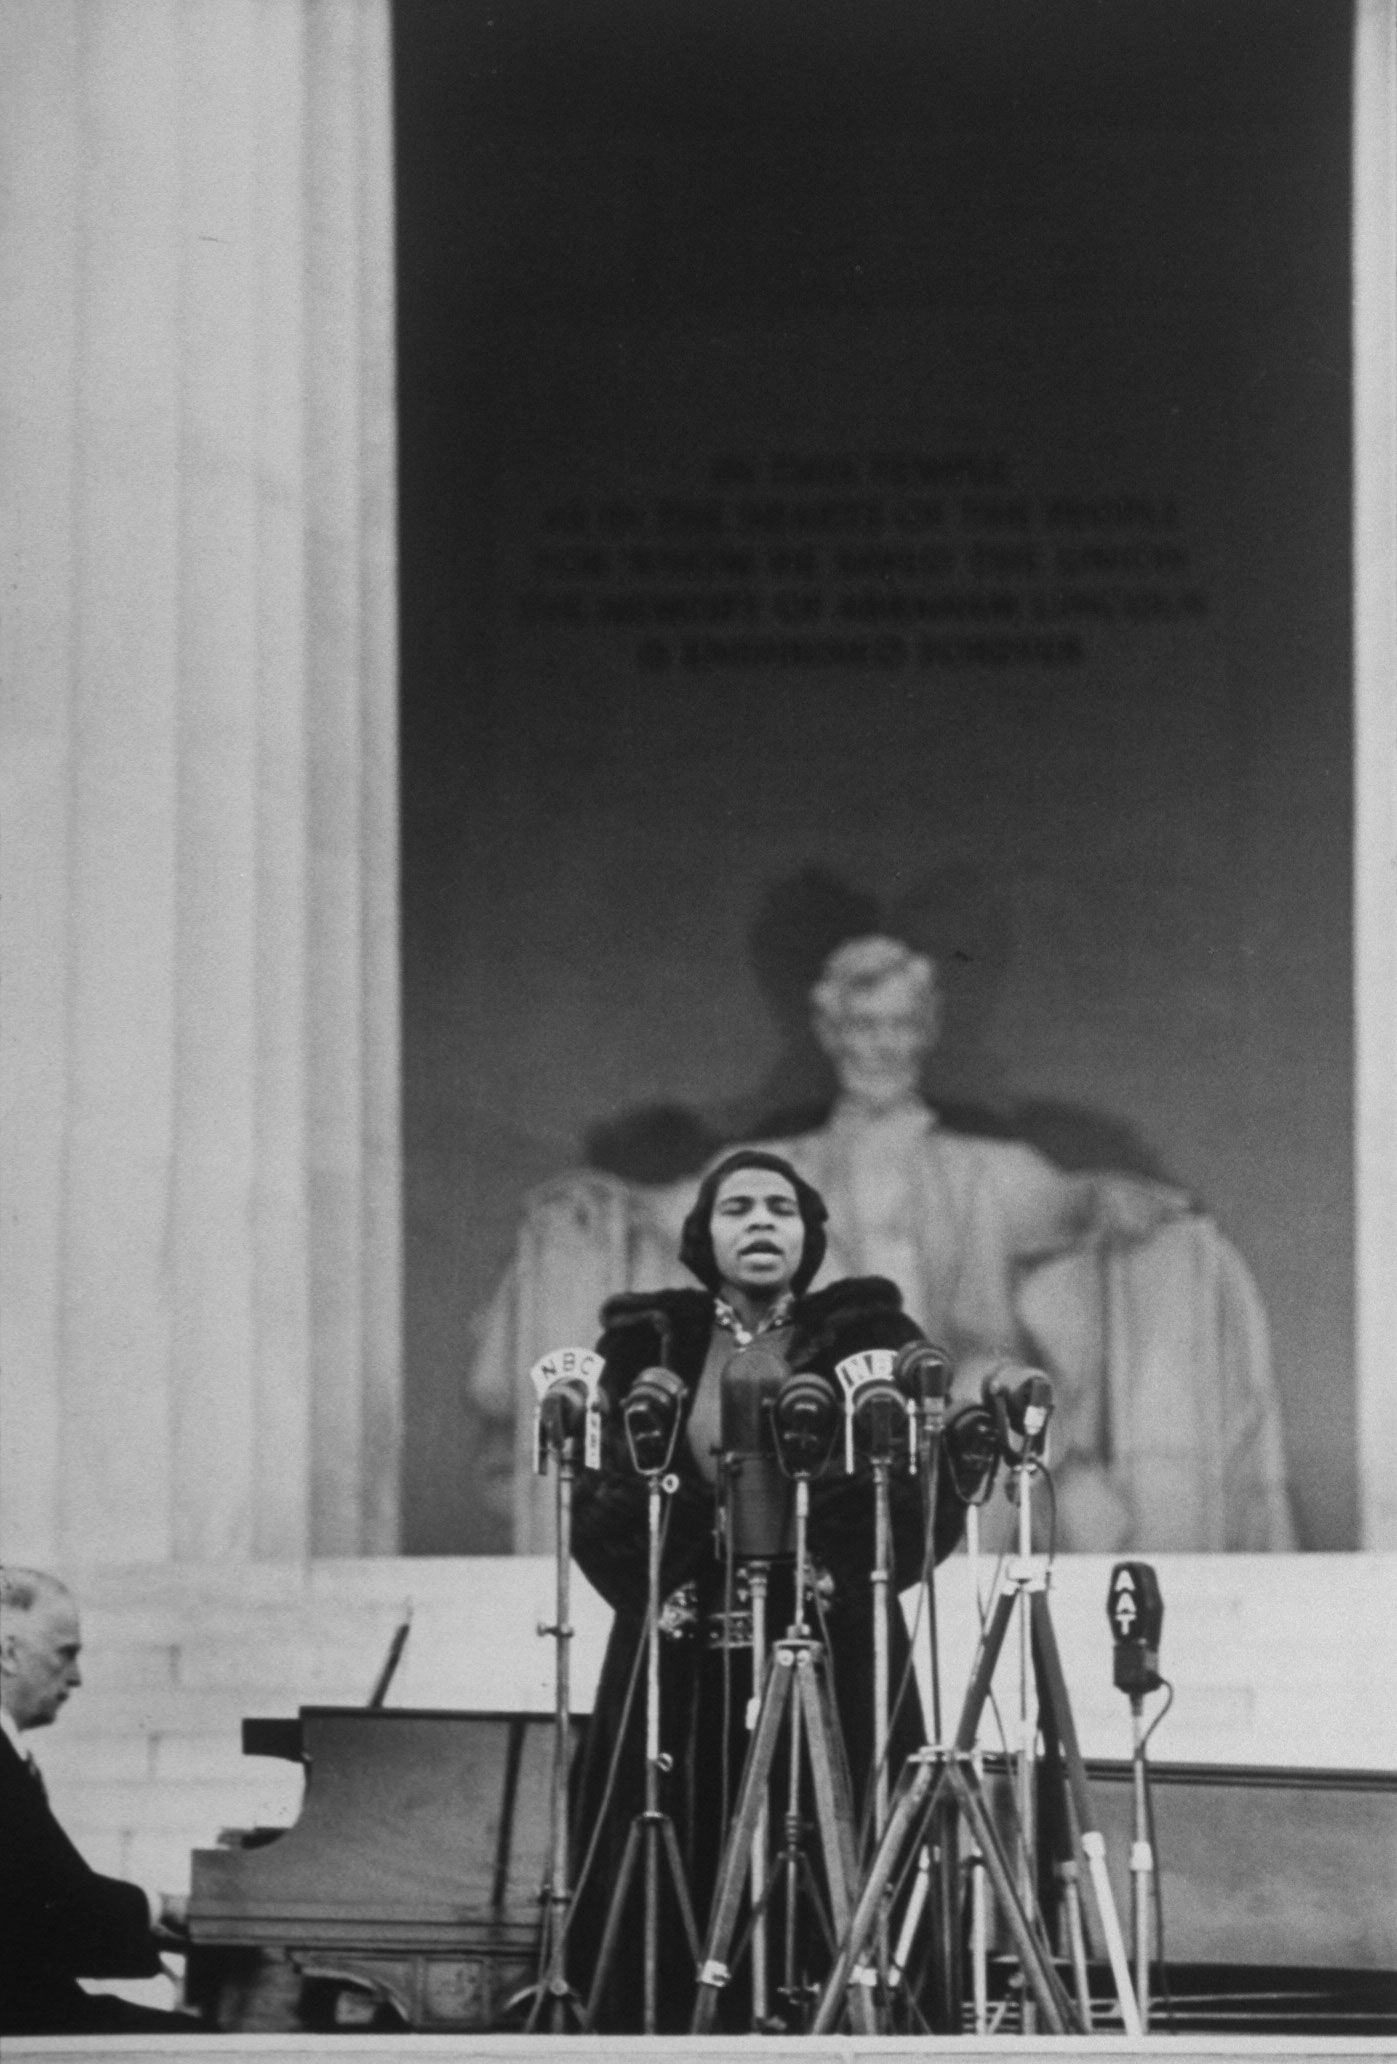 Marian Anderson performs during her historic concert at the Lincoln Memorial, April 9, 1939.